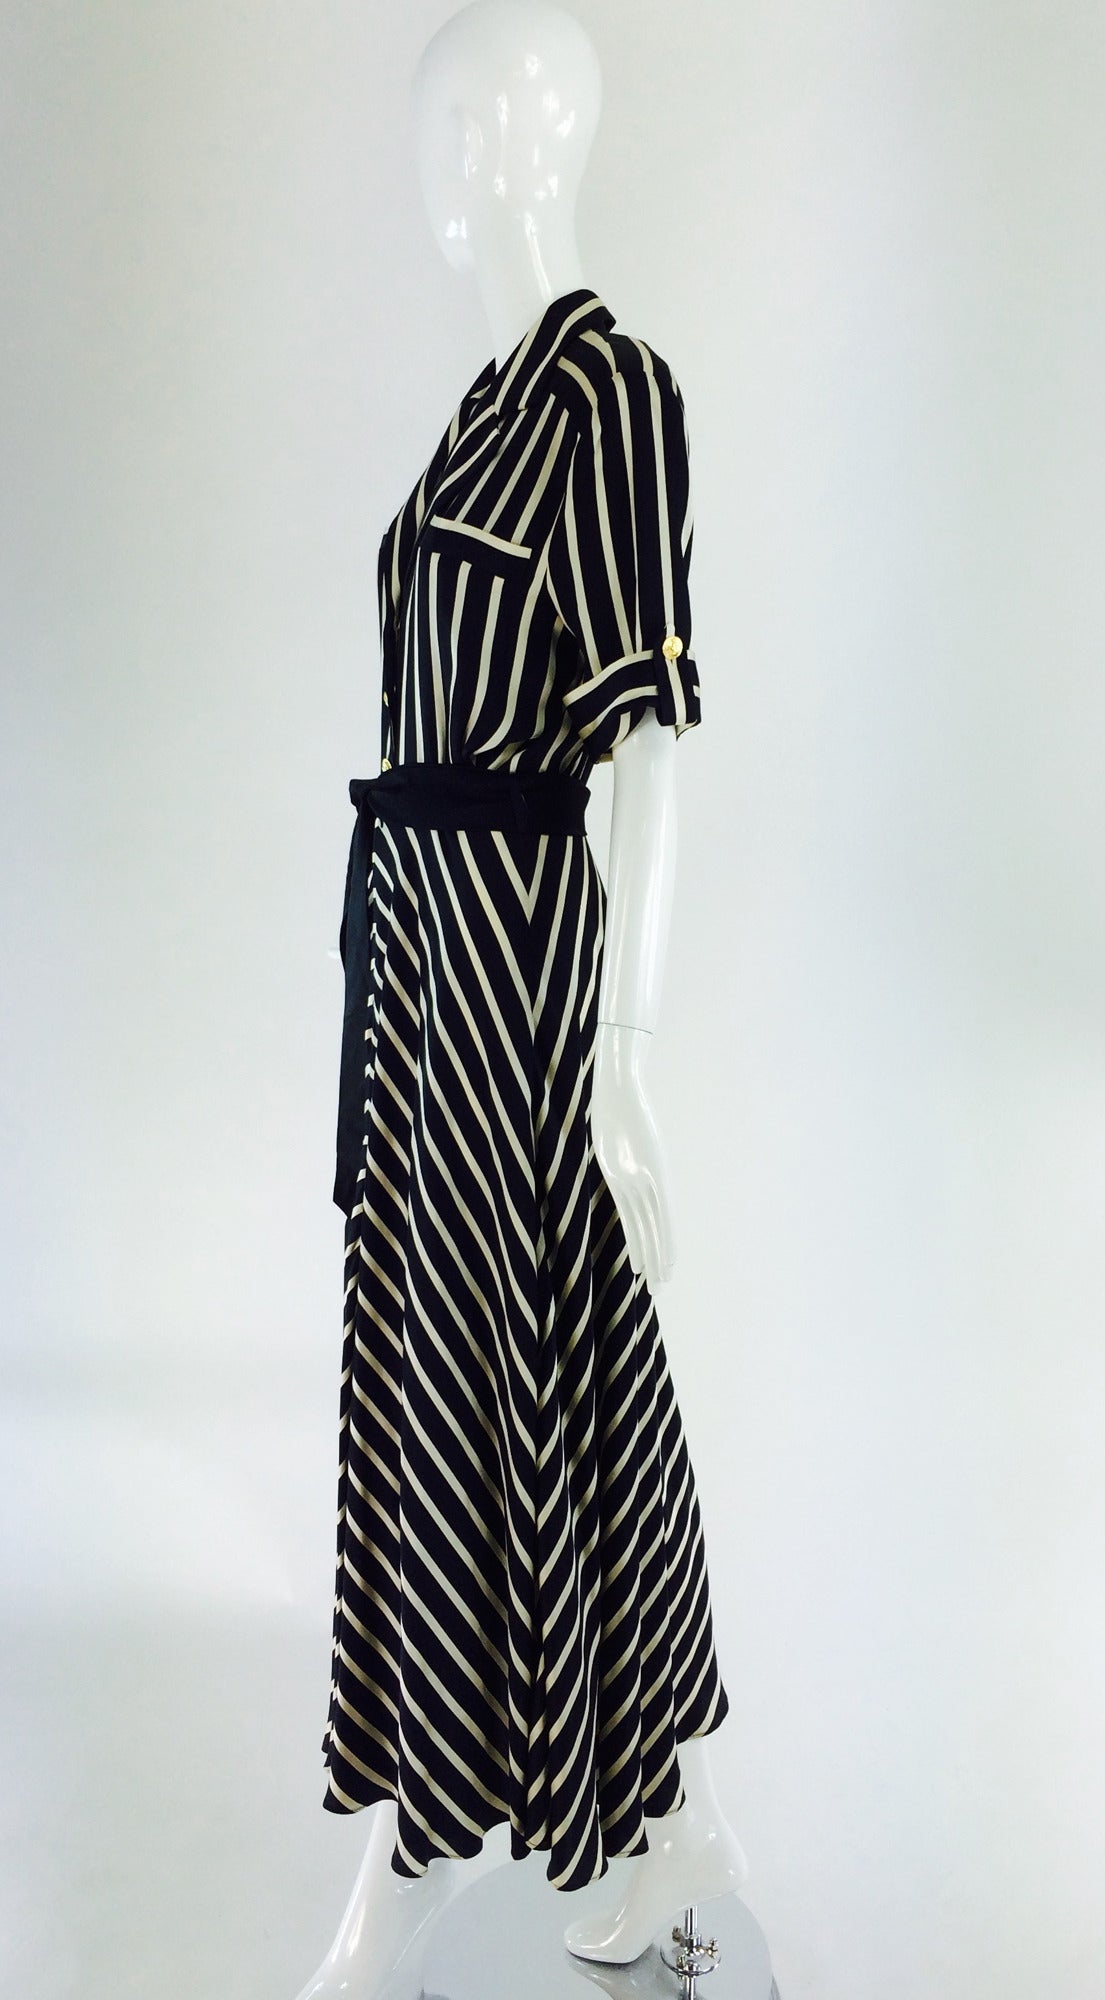 Black & ivory silk stripe dress from Escada 1980s...This dress features elbow length cuffed sleeves with gold button and tab details, notched lapels and a deep v neckline with gold button closure to the waist, with a hidden zipper from waist...